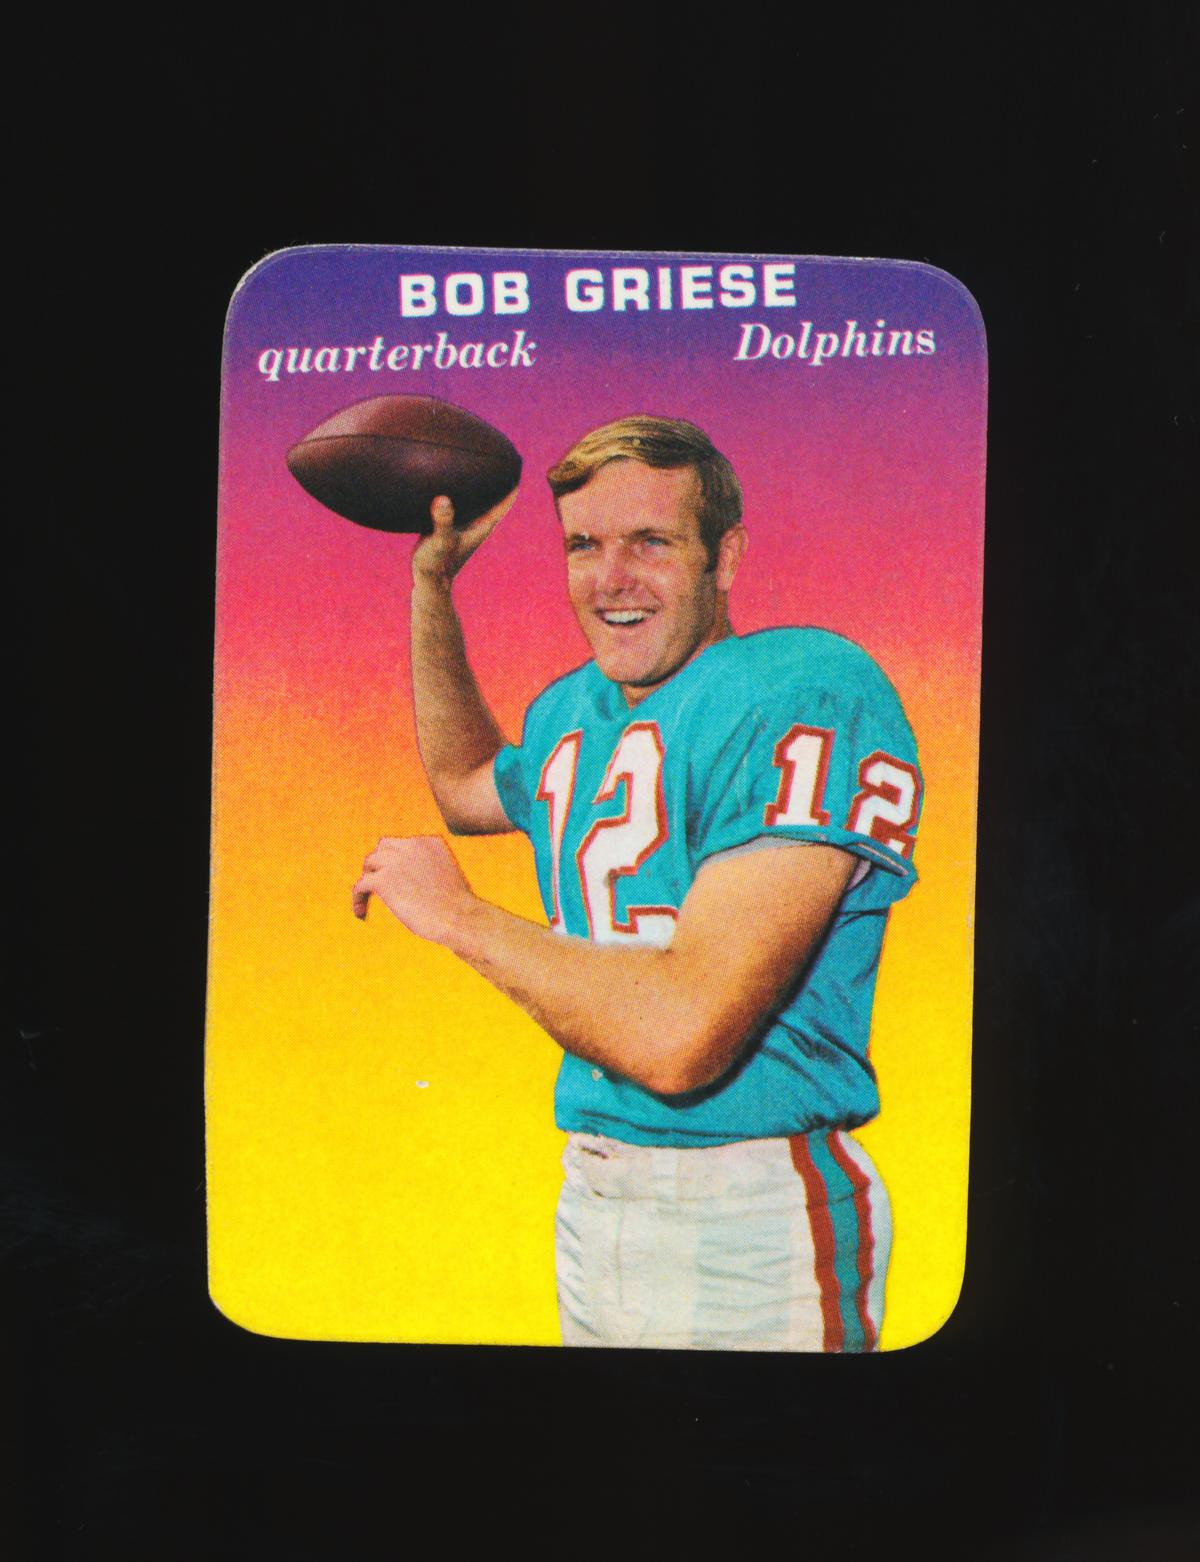 1970 Topps Glossy Foorball Card #28 of 33 Hall of Famer Bob Griese Miami Do